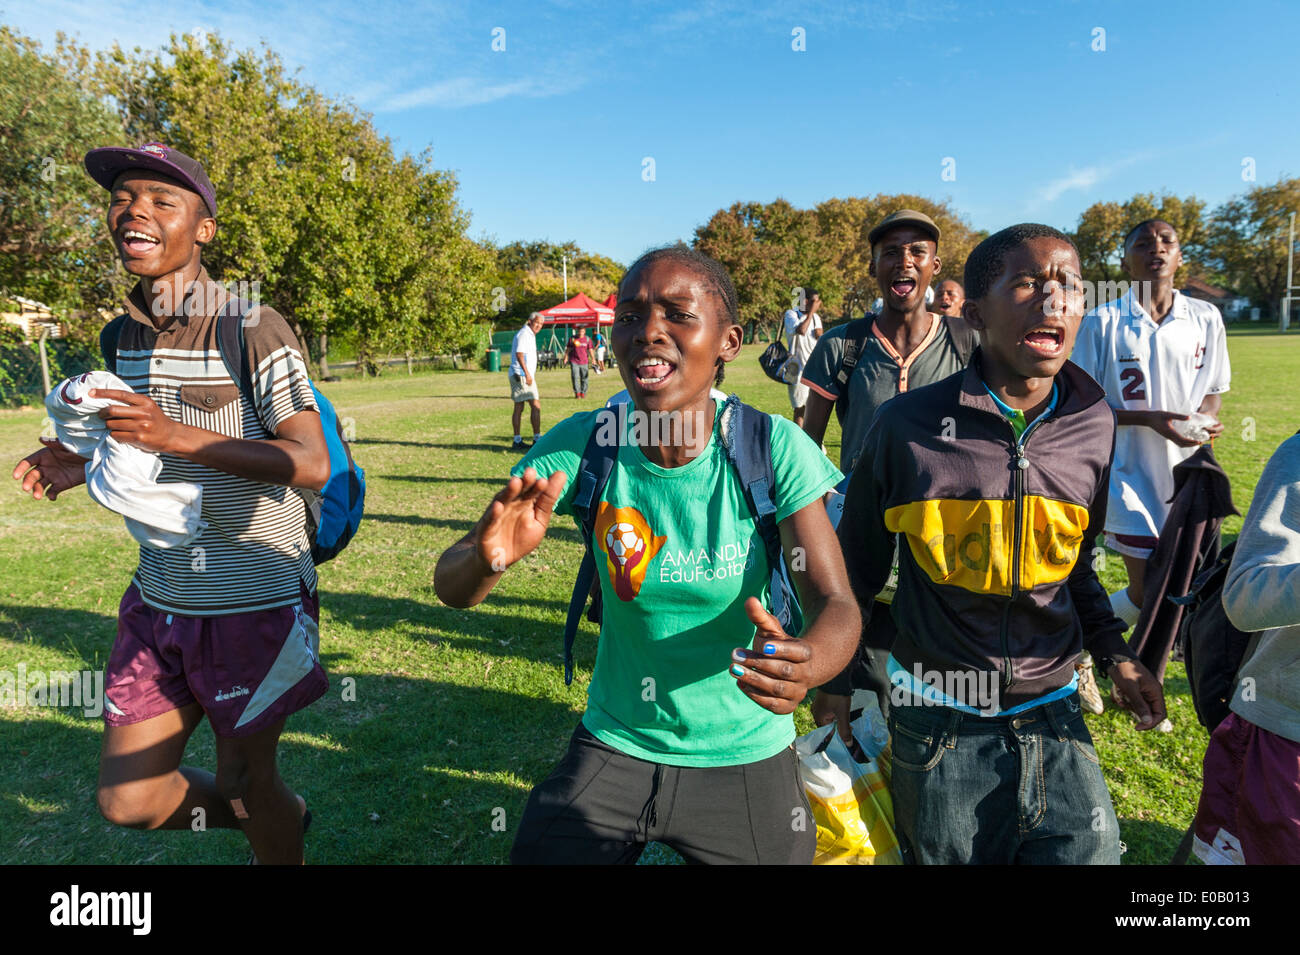 Football fans from Khayelitsha celebrating the win of their team, Cape Town, South Africa Stock Photo